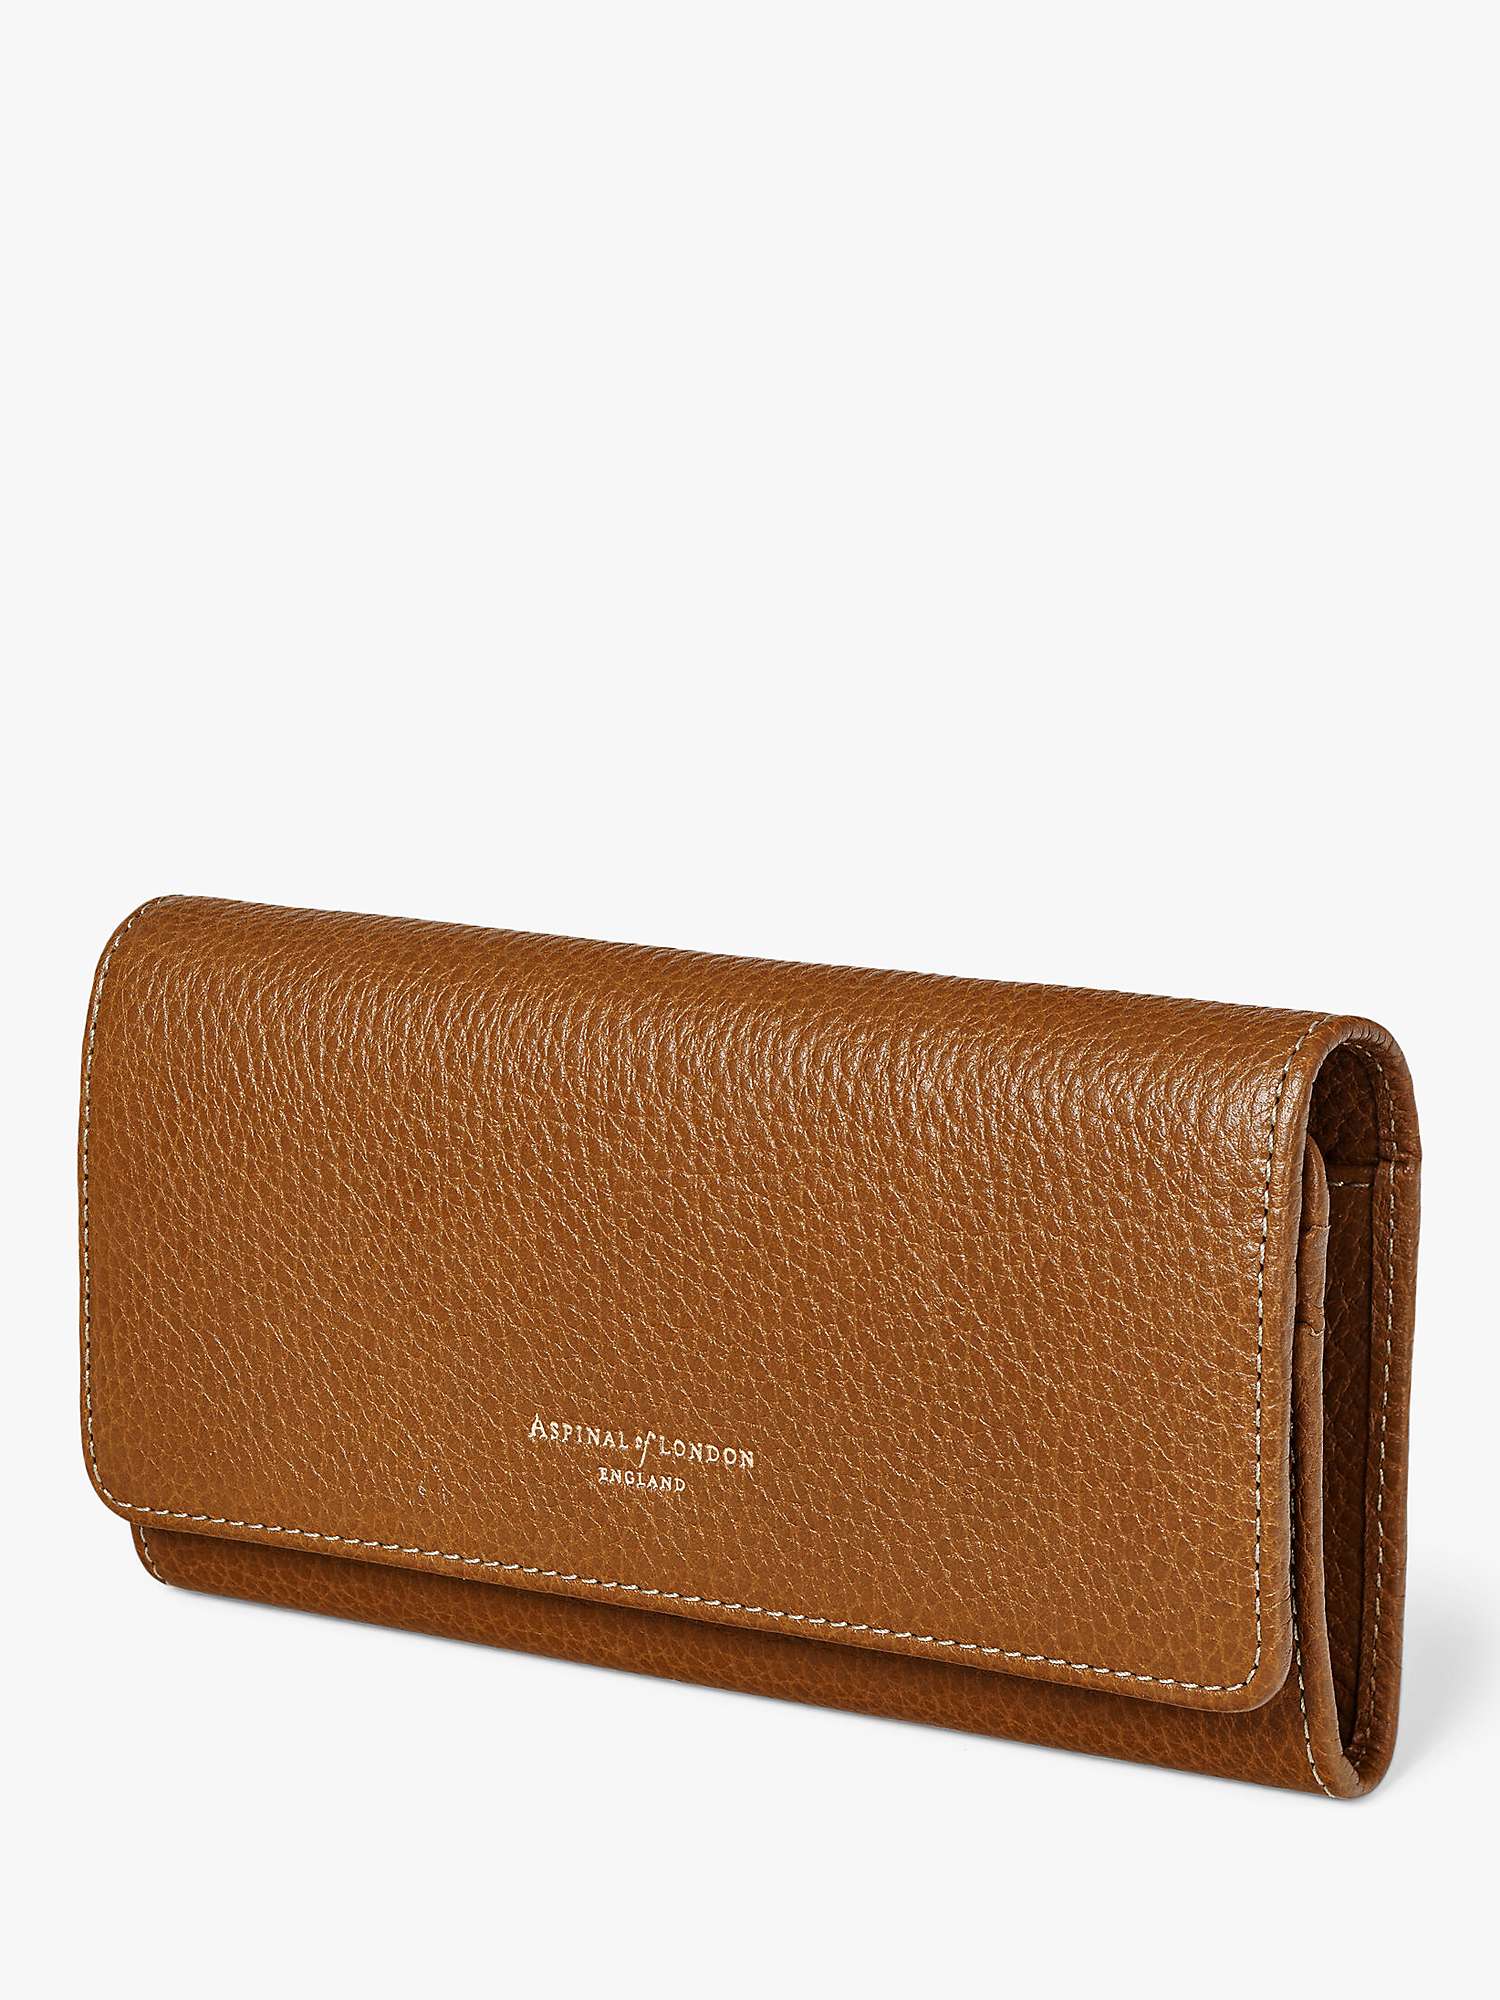 Buy Aspinal of London Pebble Leather London Midi Purse Online at johnlewis.com